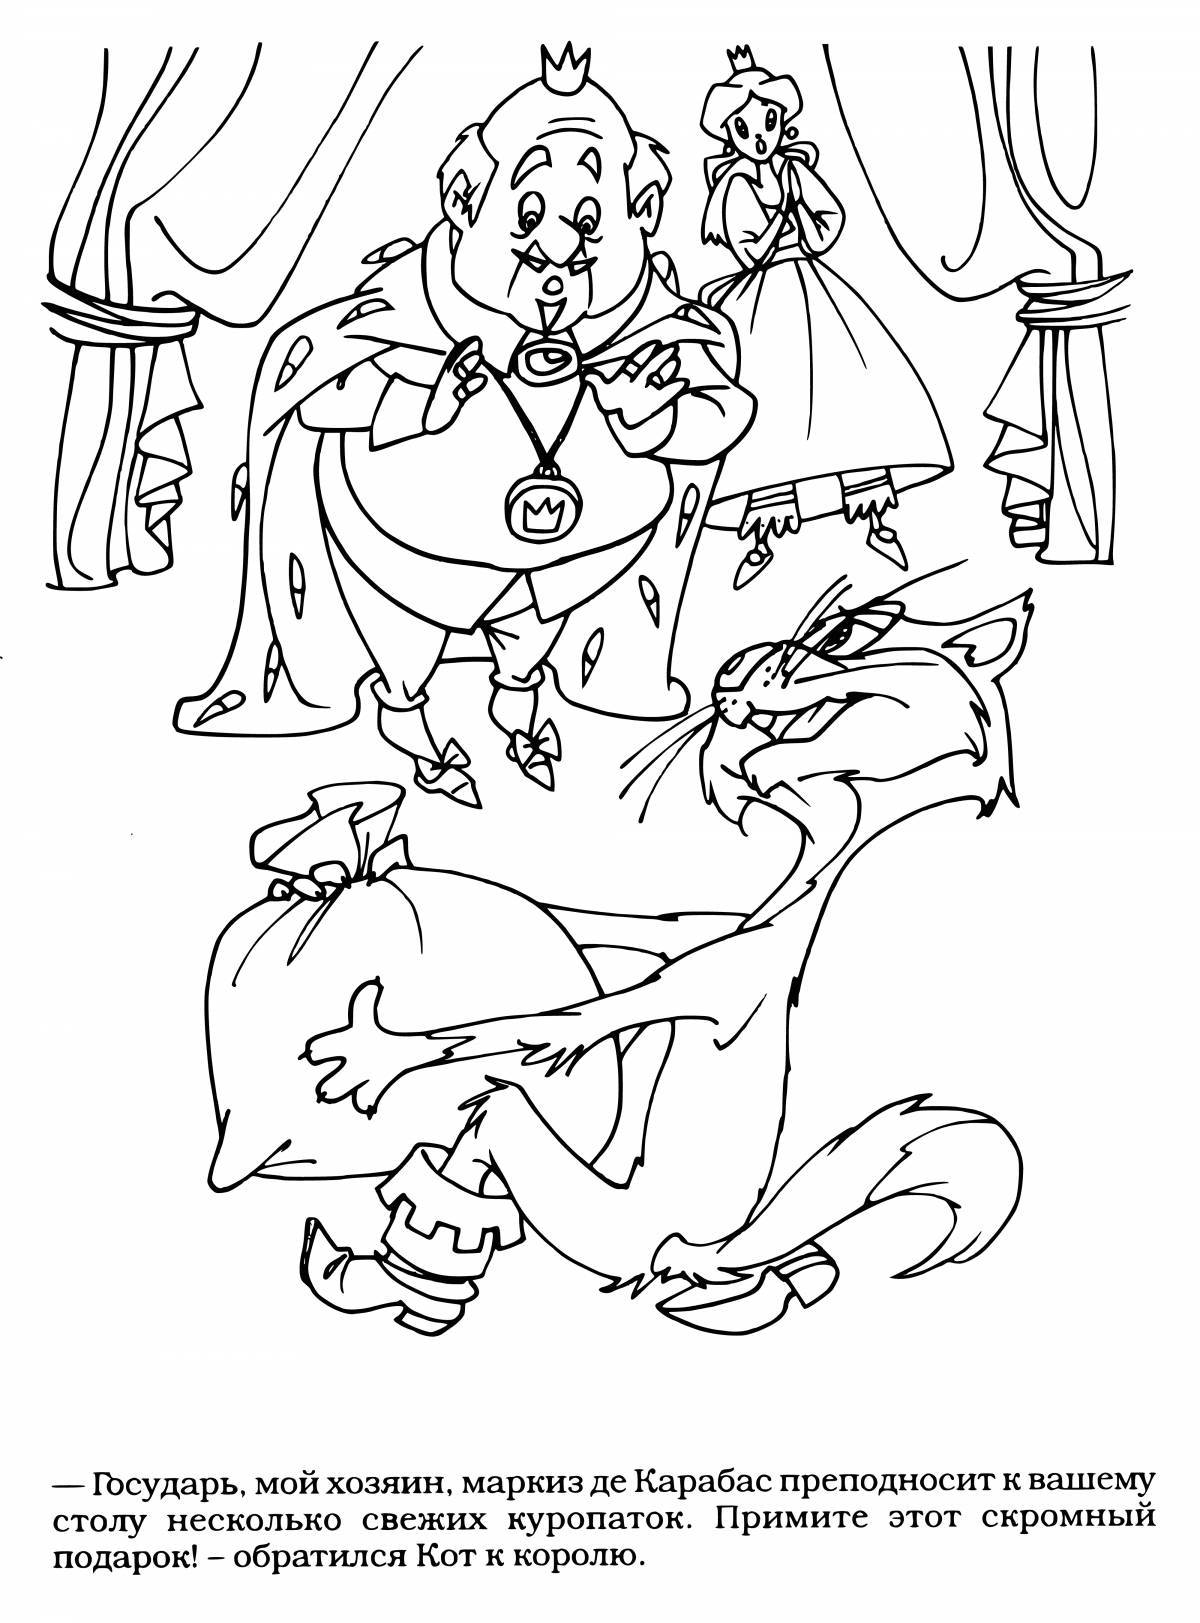 Fun coloring pages with fairy tales by Charles Perrault